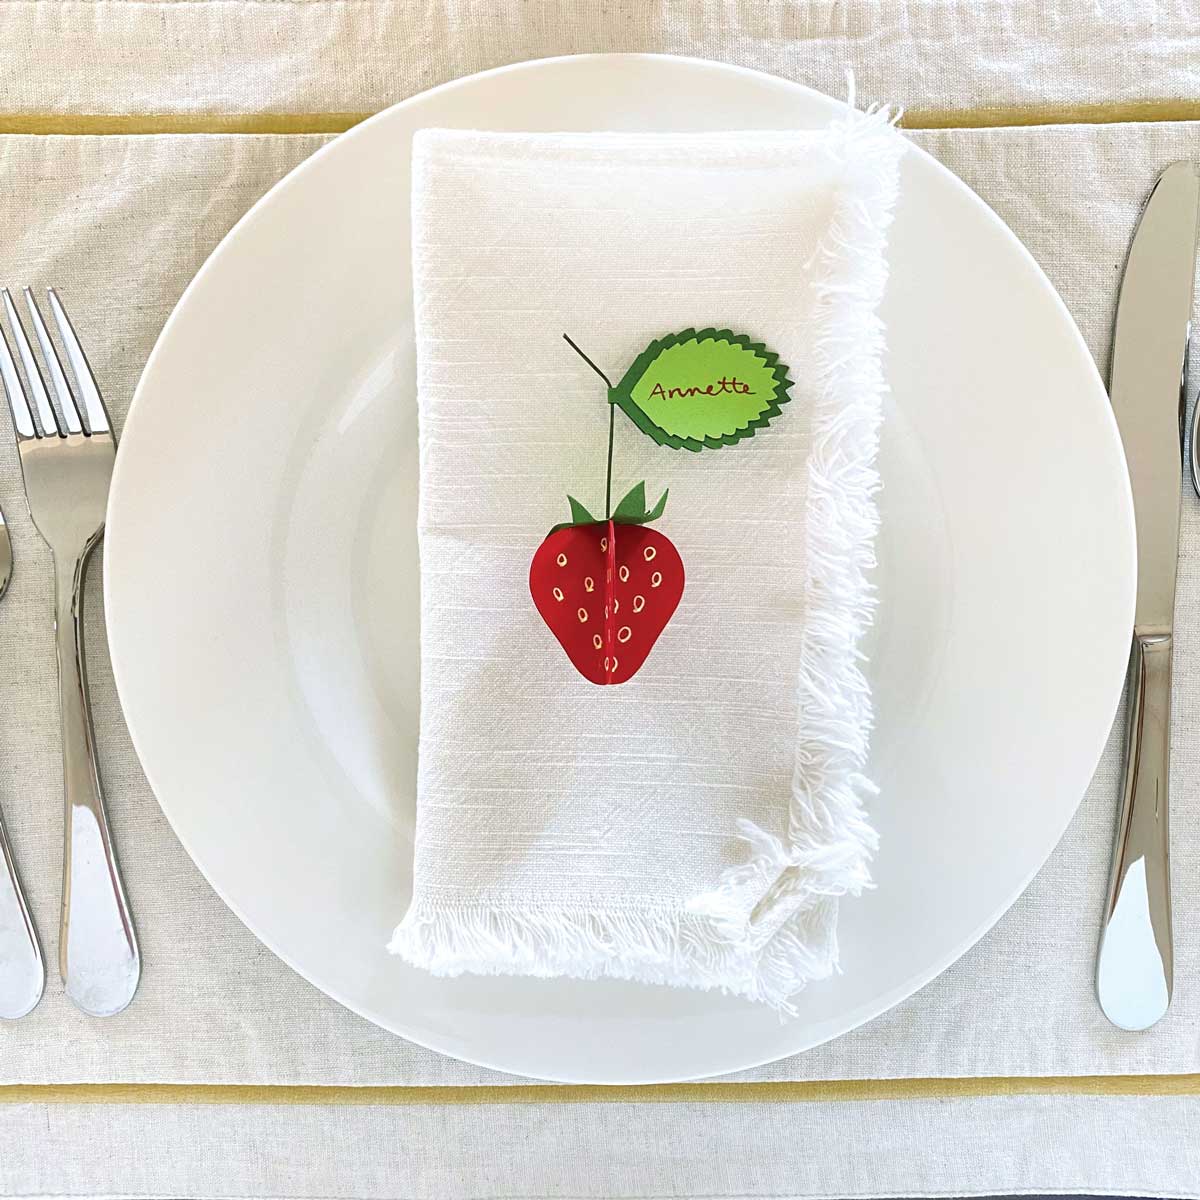 Handmade Paper Strawberries showm as part of a place setting